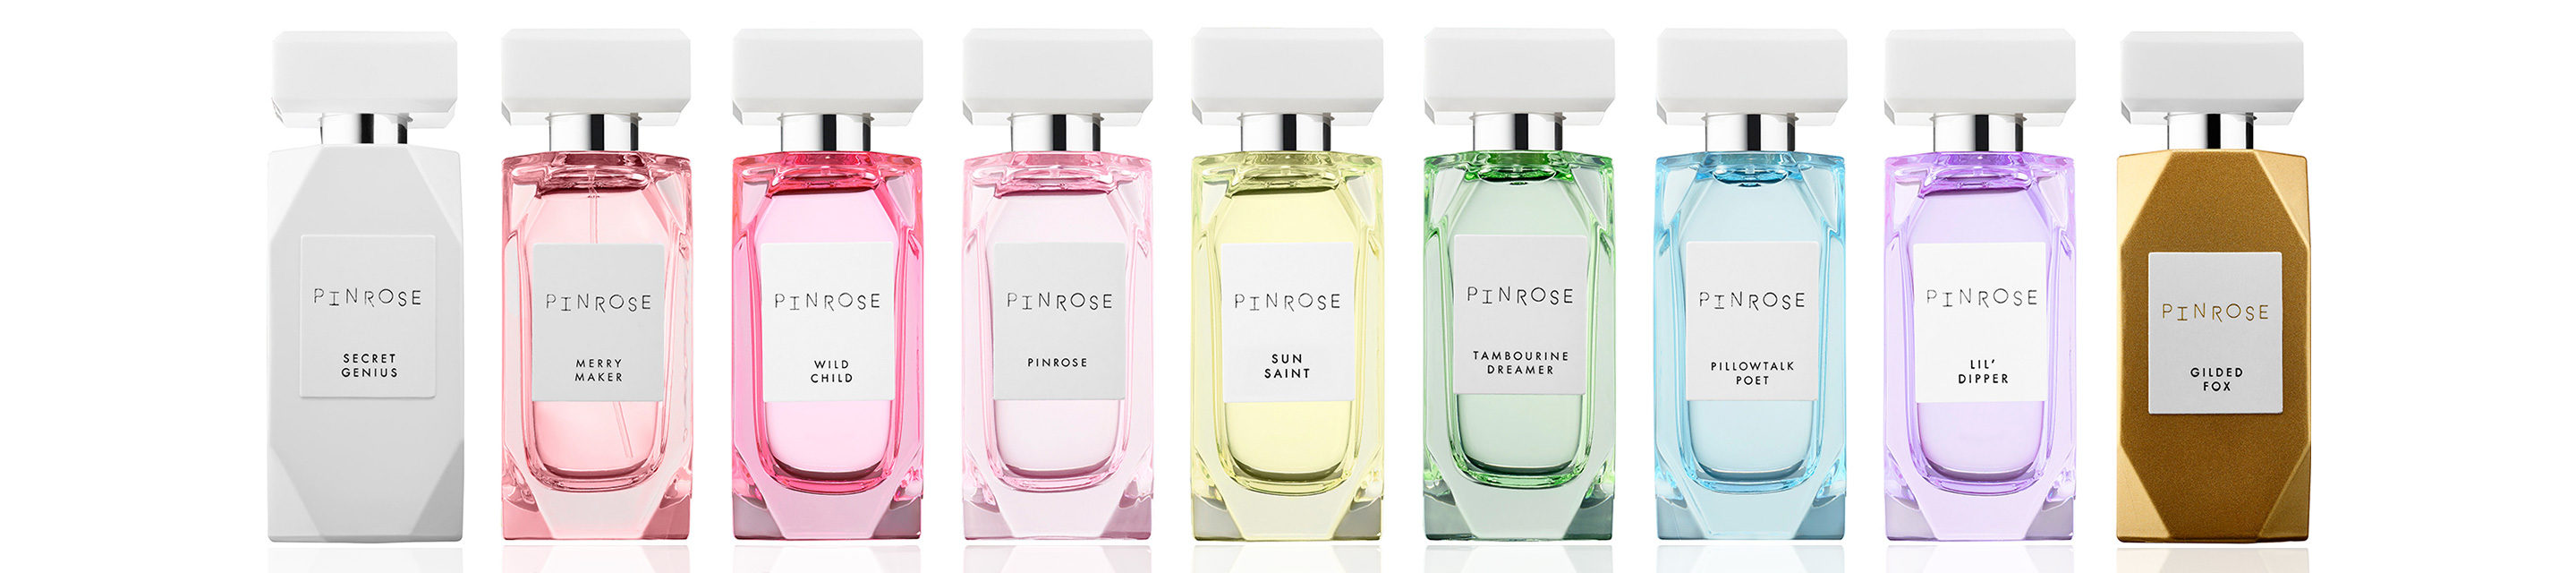 Is Pinrose cruelty free?